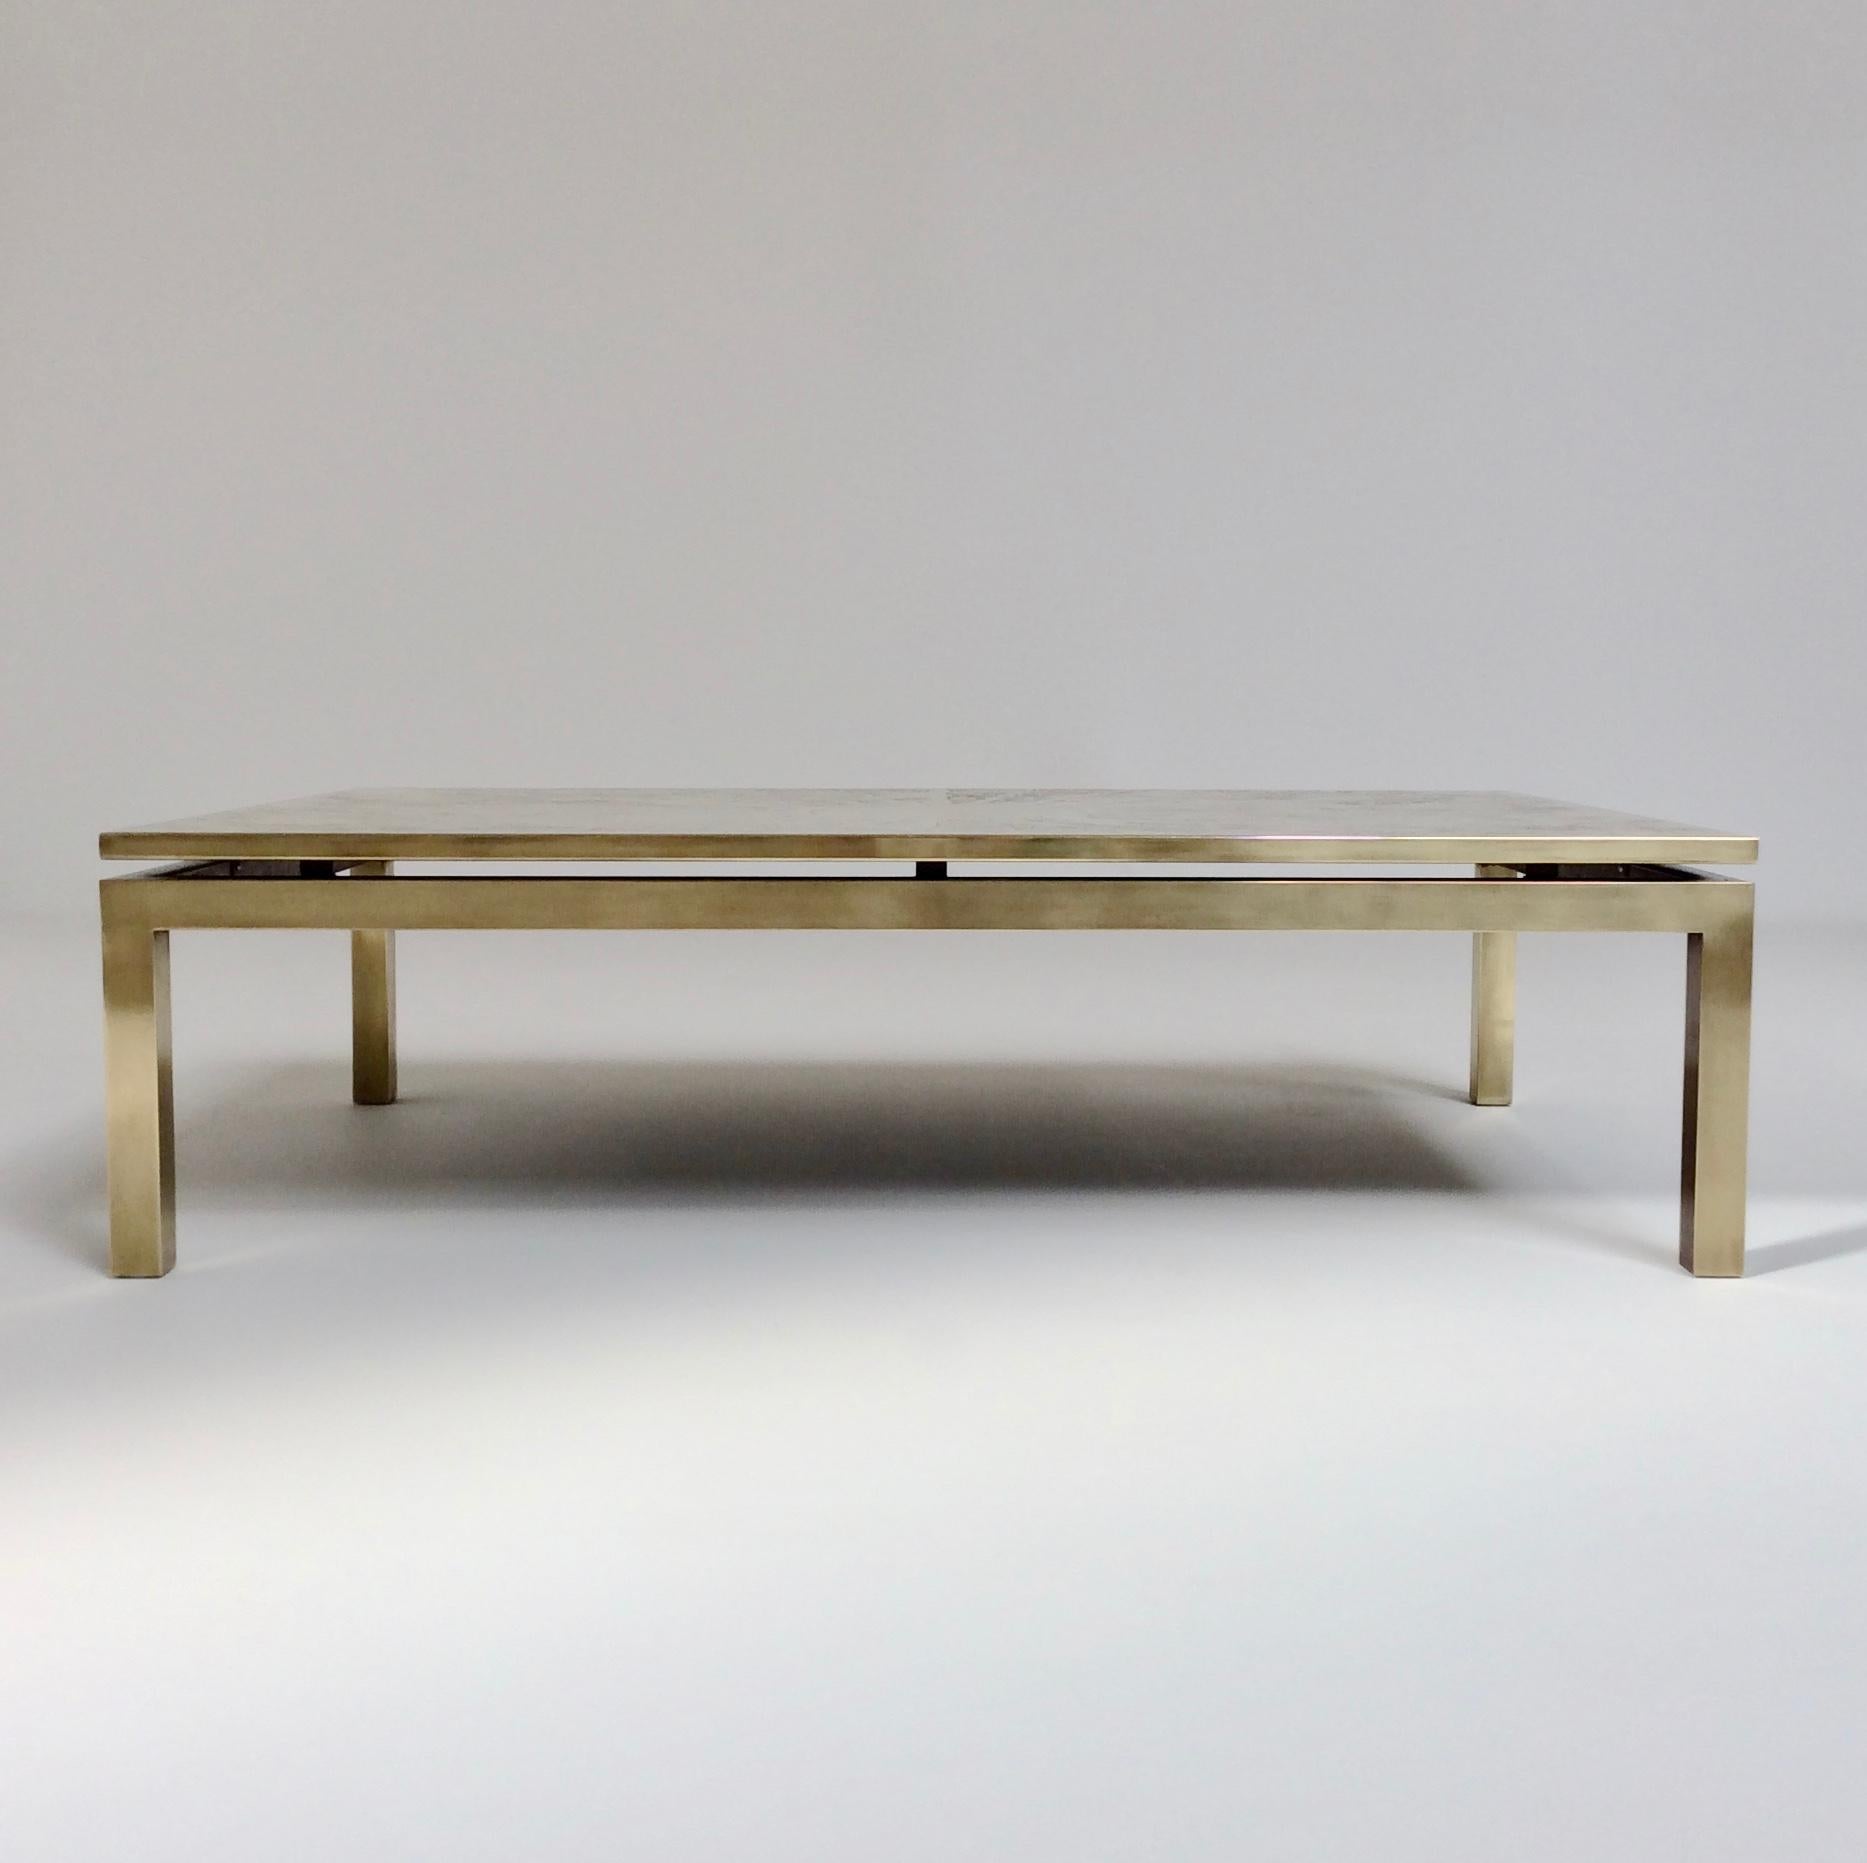 Nice coffee table, etched brass, circa 1970, Belgium.
Signed on the top ADS, Belgium school with artist of the same period such as Willy Daro, Christian Krekels, Lova Creation, Armand Jonckers, ...
Dimensions: 130 cm W, 80 cm D, 36 cm H.
Good